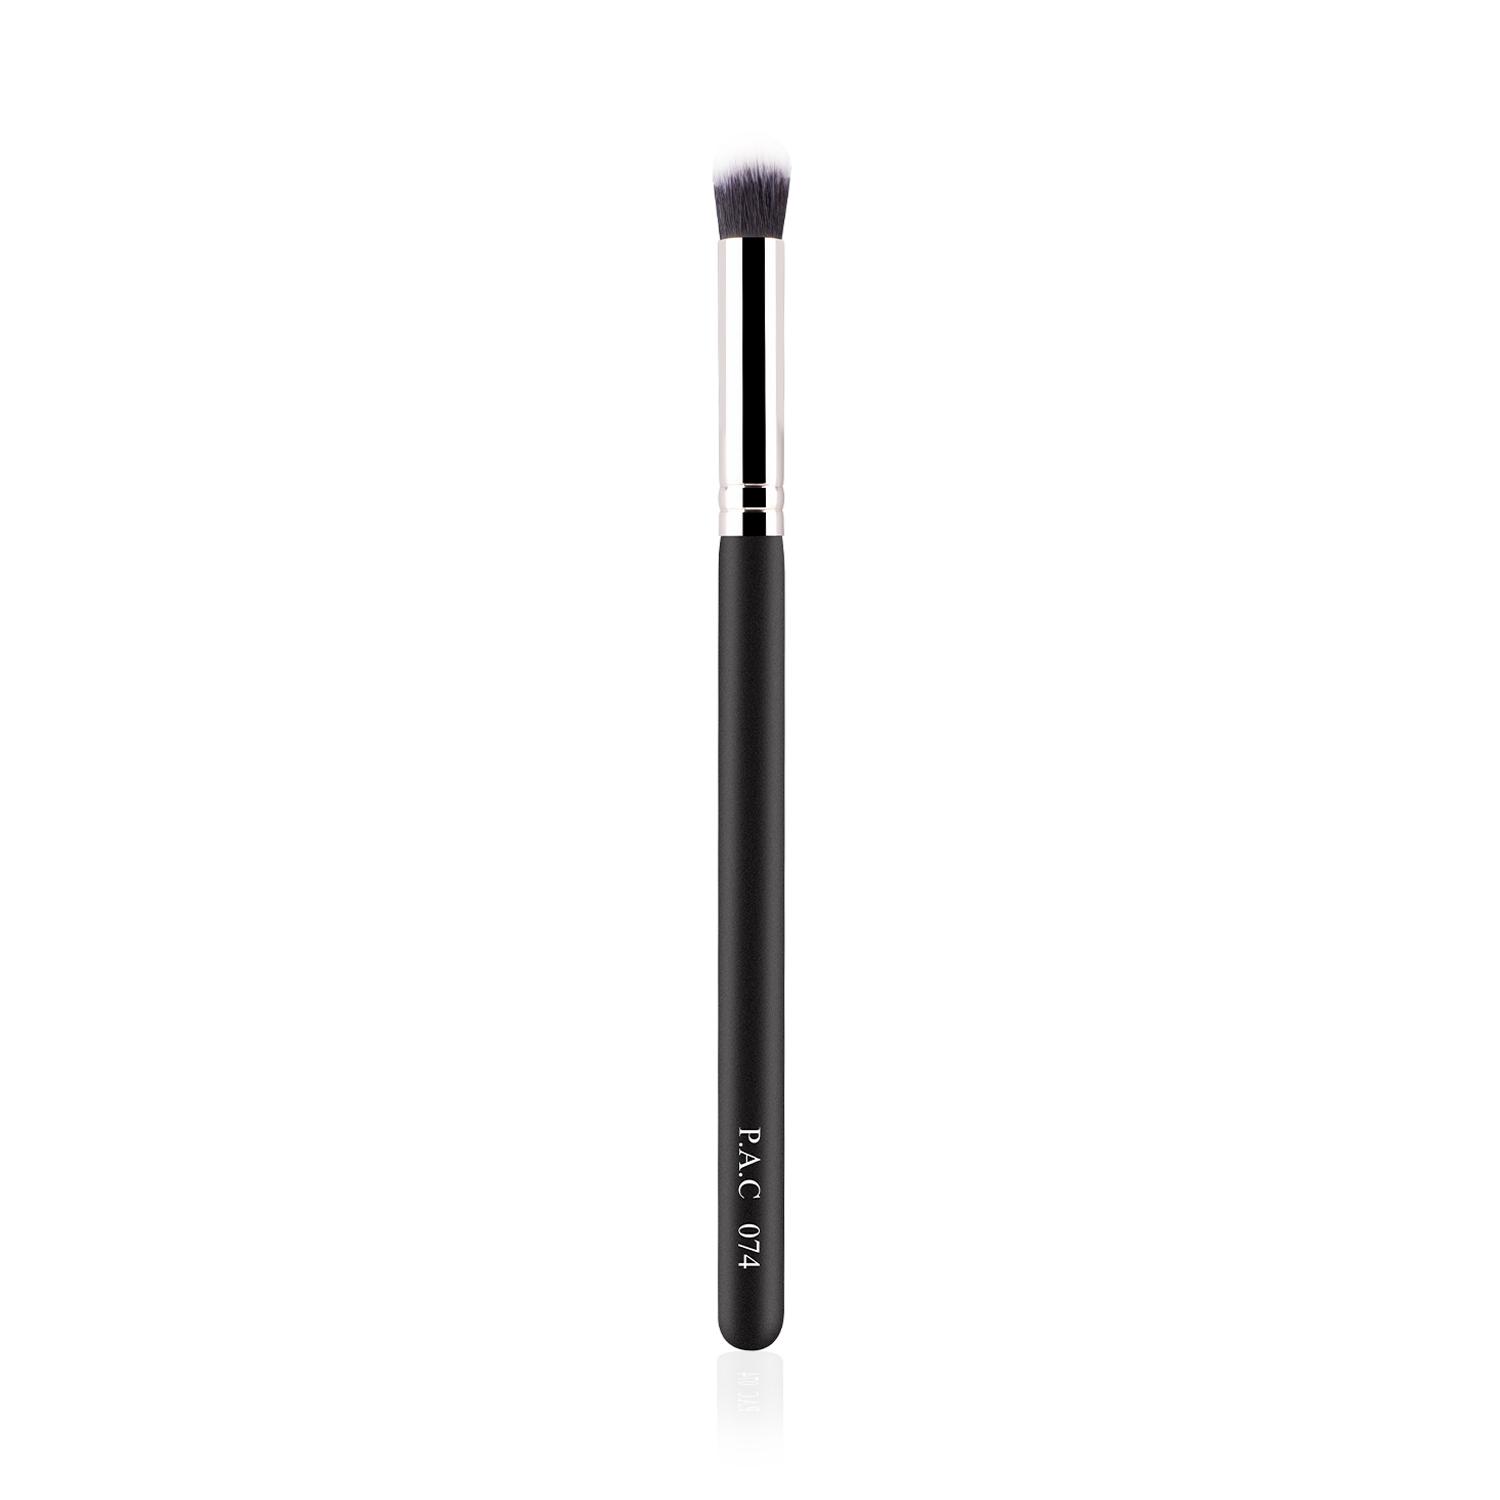 PAC | PAC Concealer Brush - 074 (1Pc)